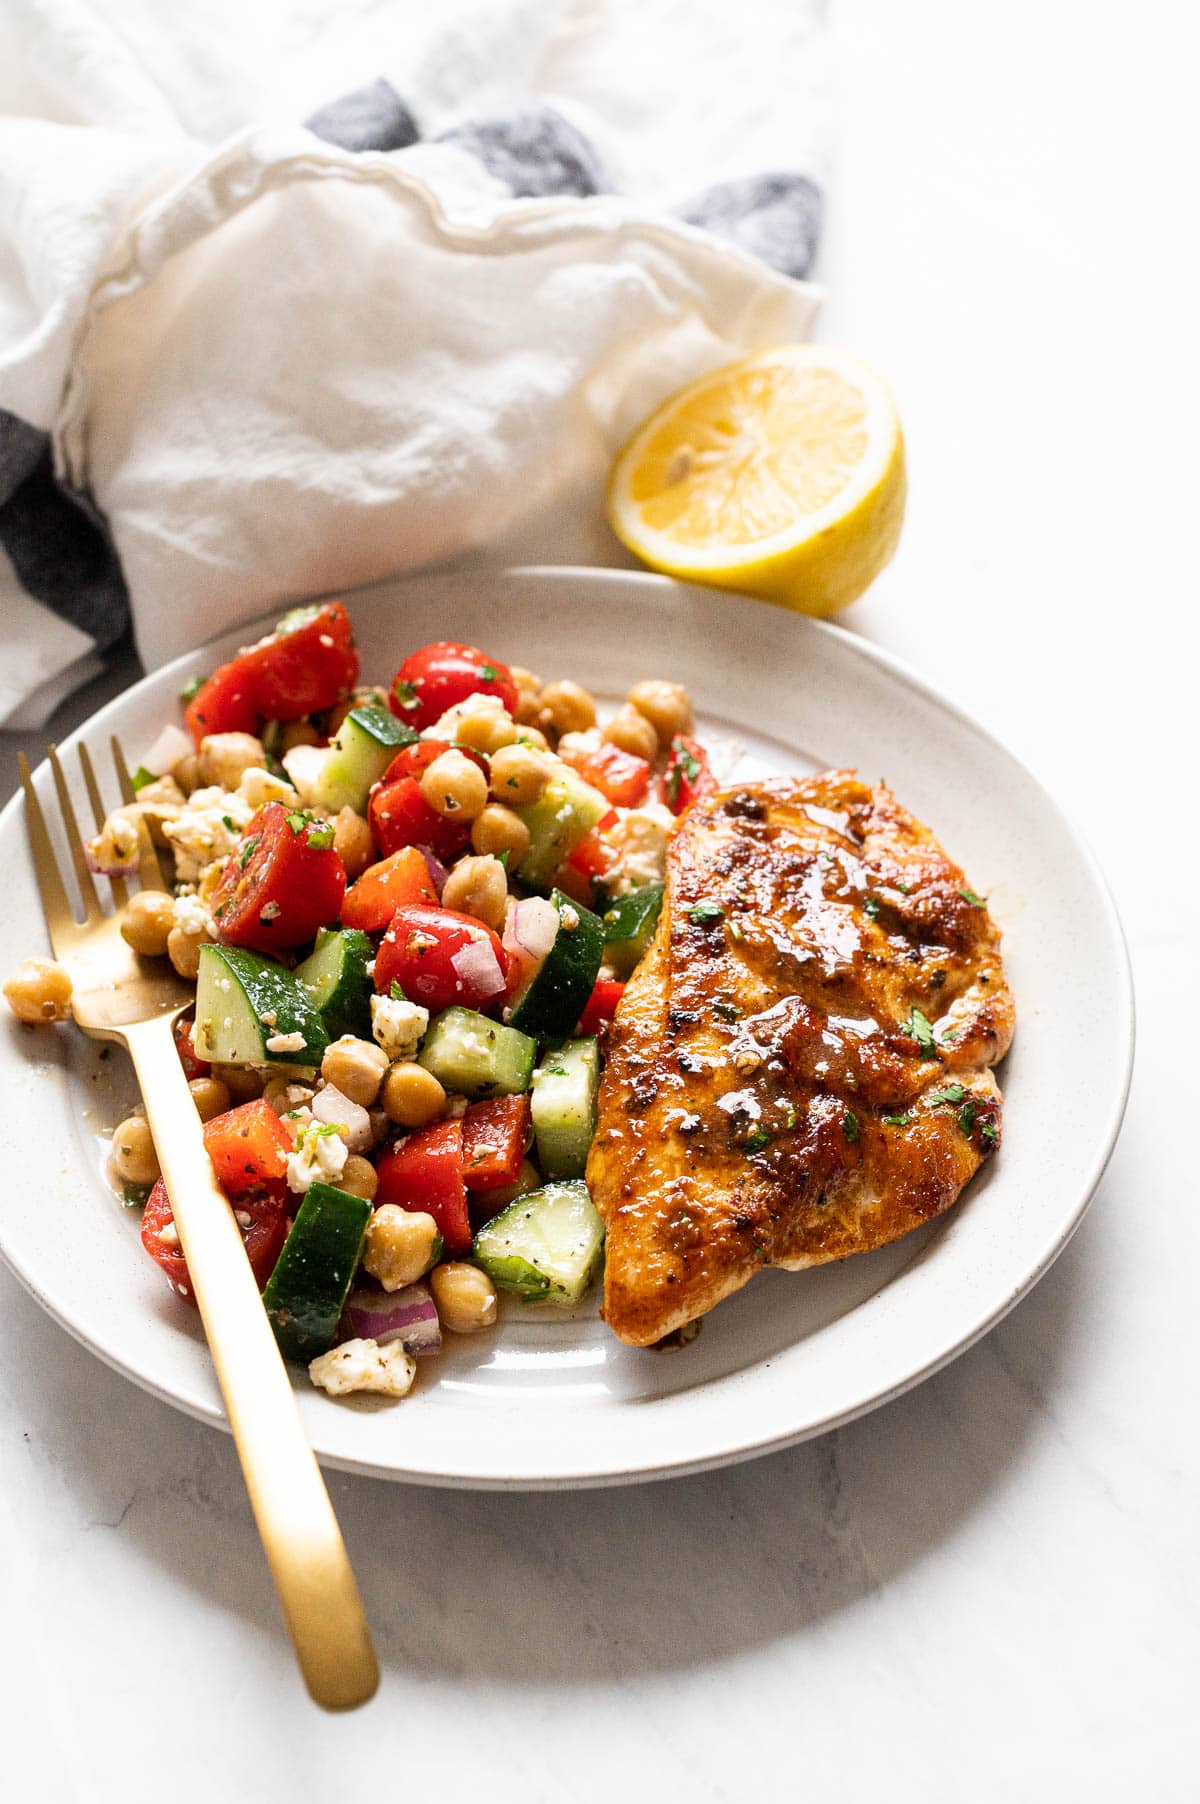 Pan fried chicken breast served with Mediterranean chickpea salad on a plate with a fork.